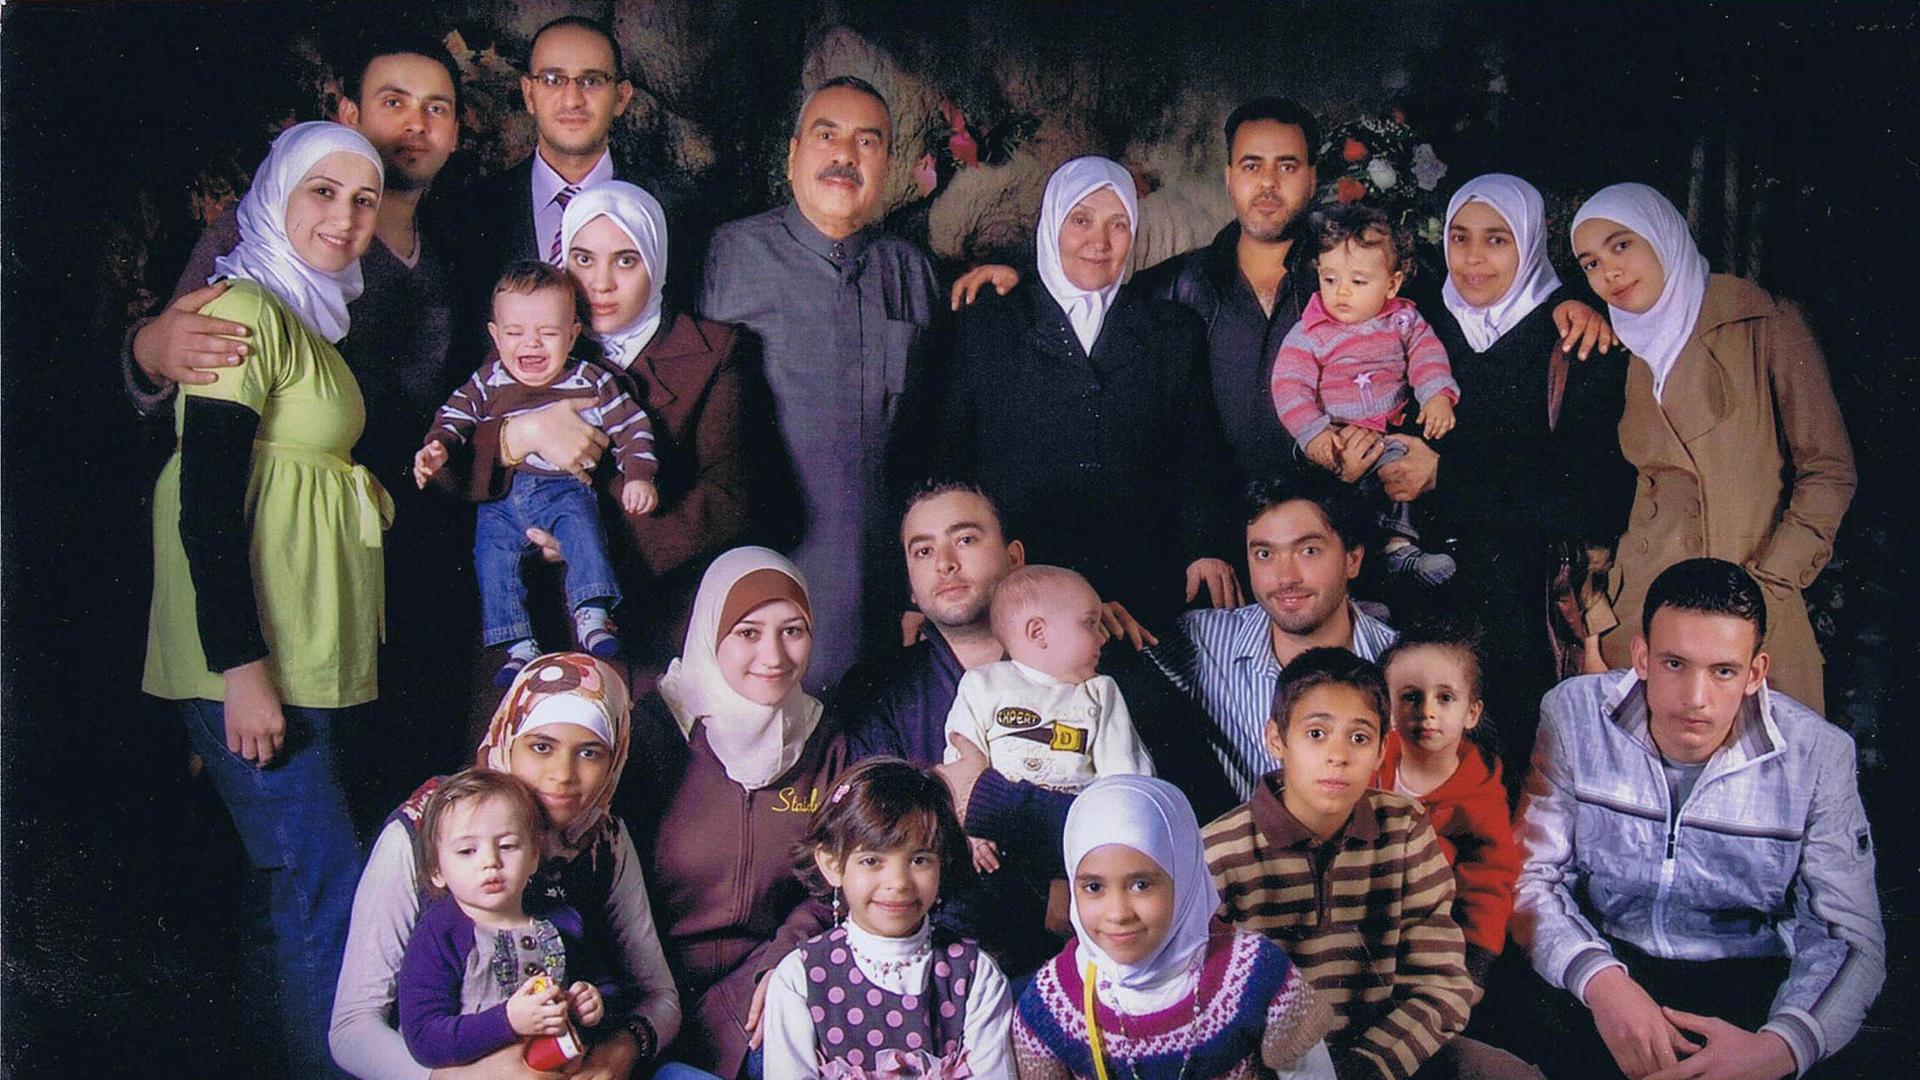 A family portrait with several younger children in the front row and adults in the back row.